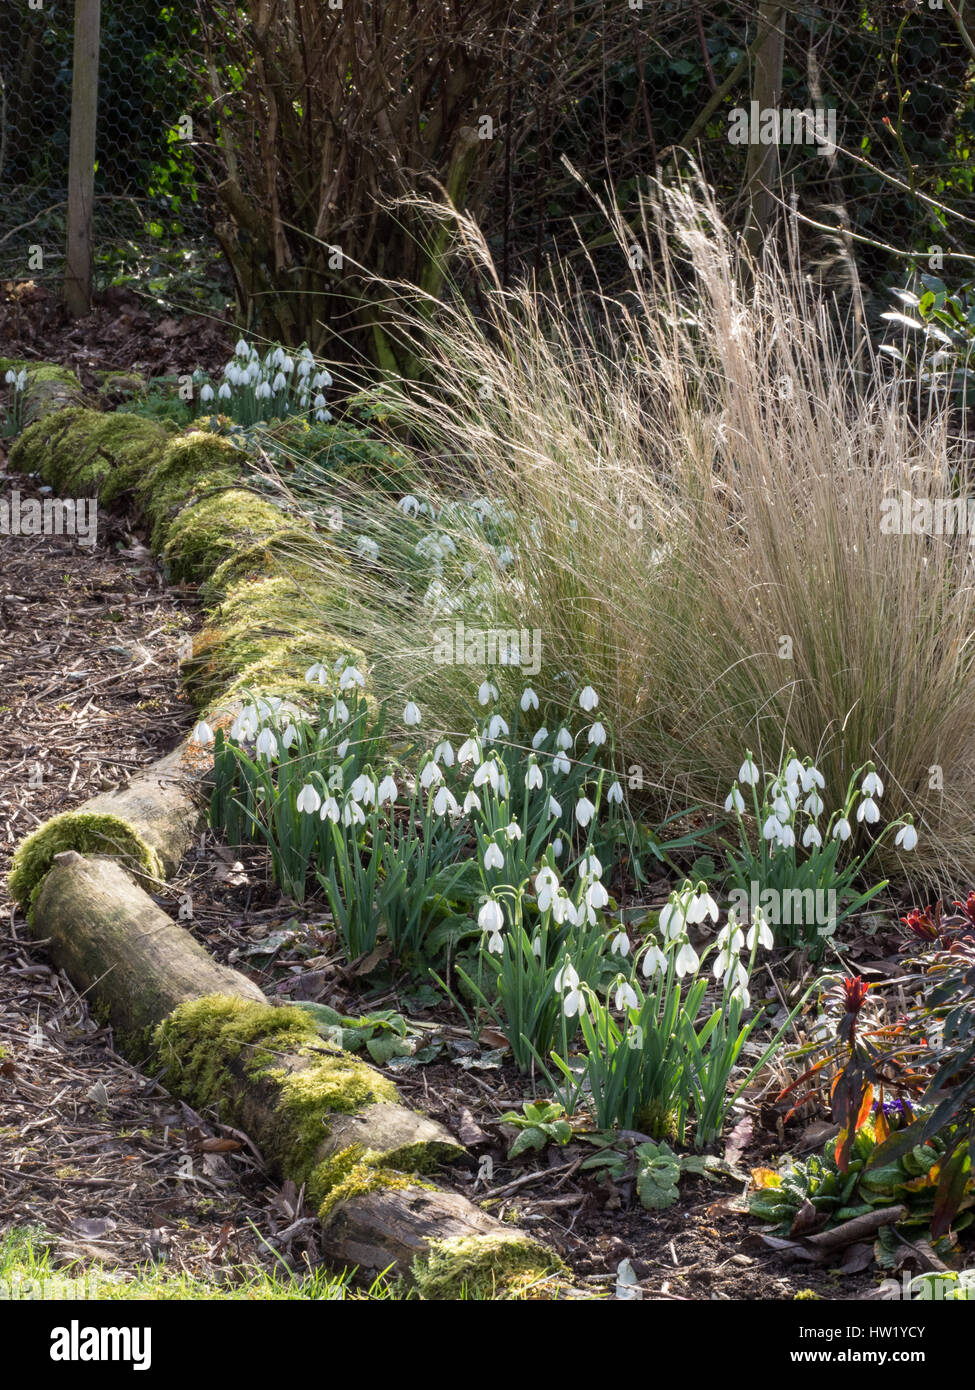 Clumps of snowdrops in flower alongside a bark path Stock Photo